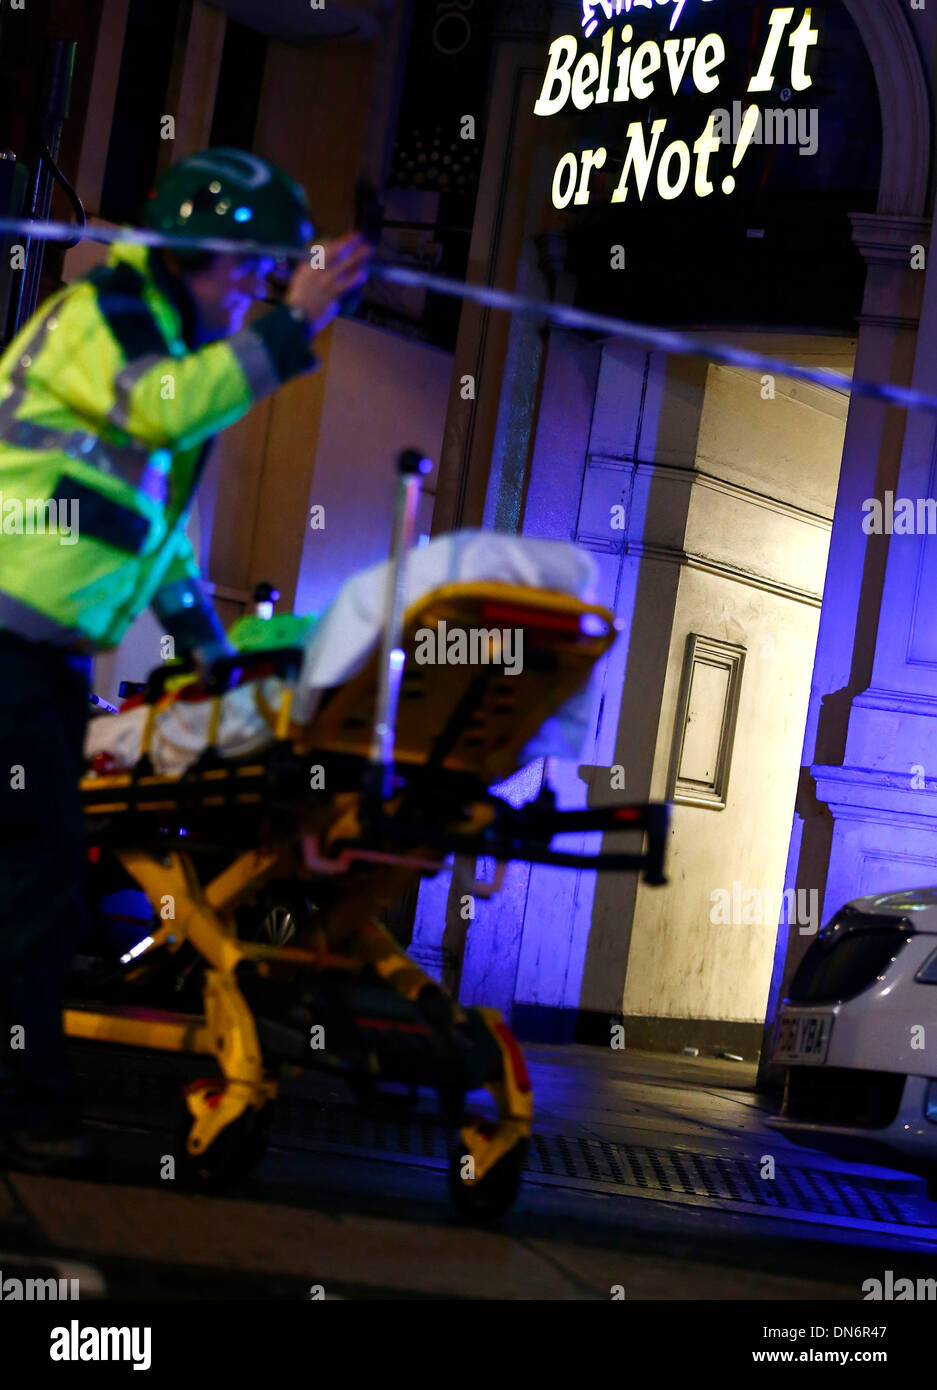 London. 20th Dec, 2013. A rescuer works at the site of a roof collapse at a theatre in central London on Dec. 19, 2013. Some 88 people were injured, including 7 serious cases, after part of the roof in London's Apollo Theatre collapsed on Thursday. Credit:  Yin Gang/Xinhua/Alamy Live News Stock Photo